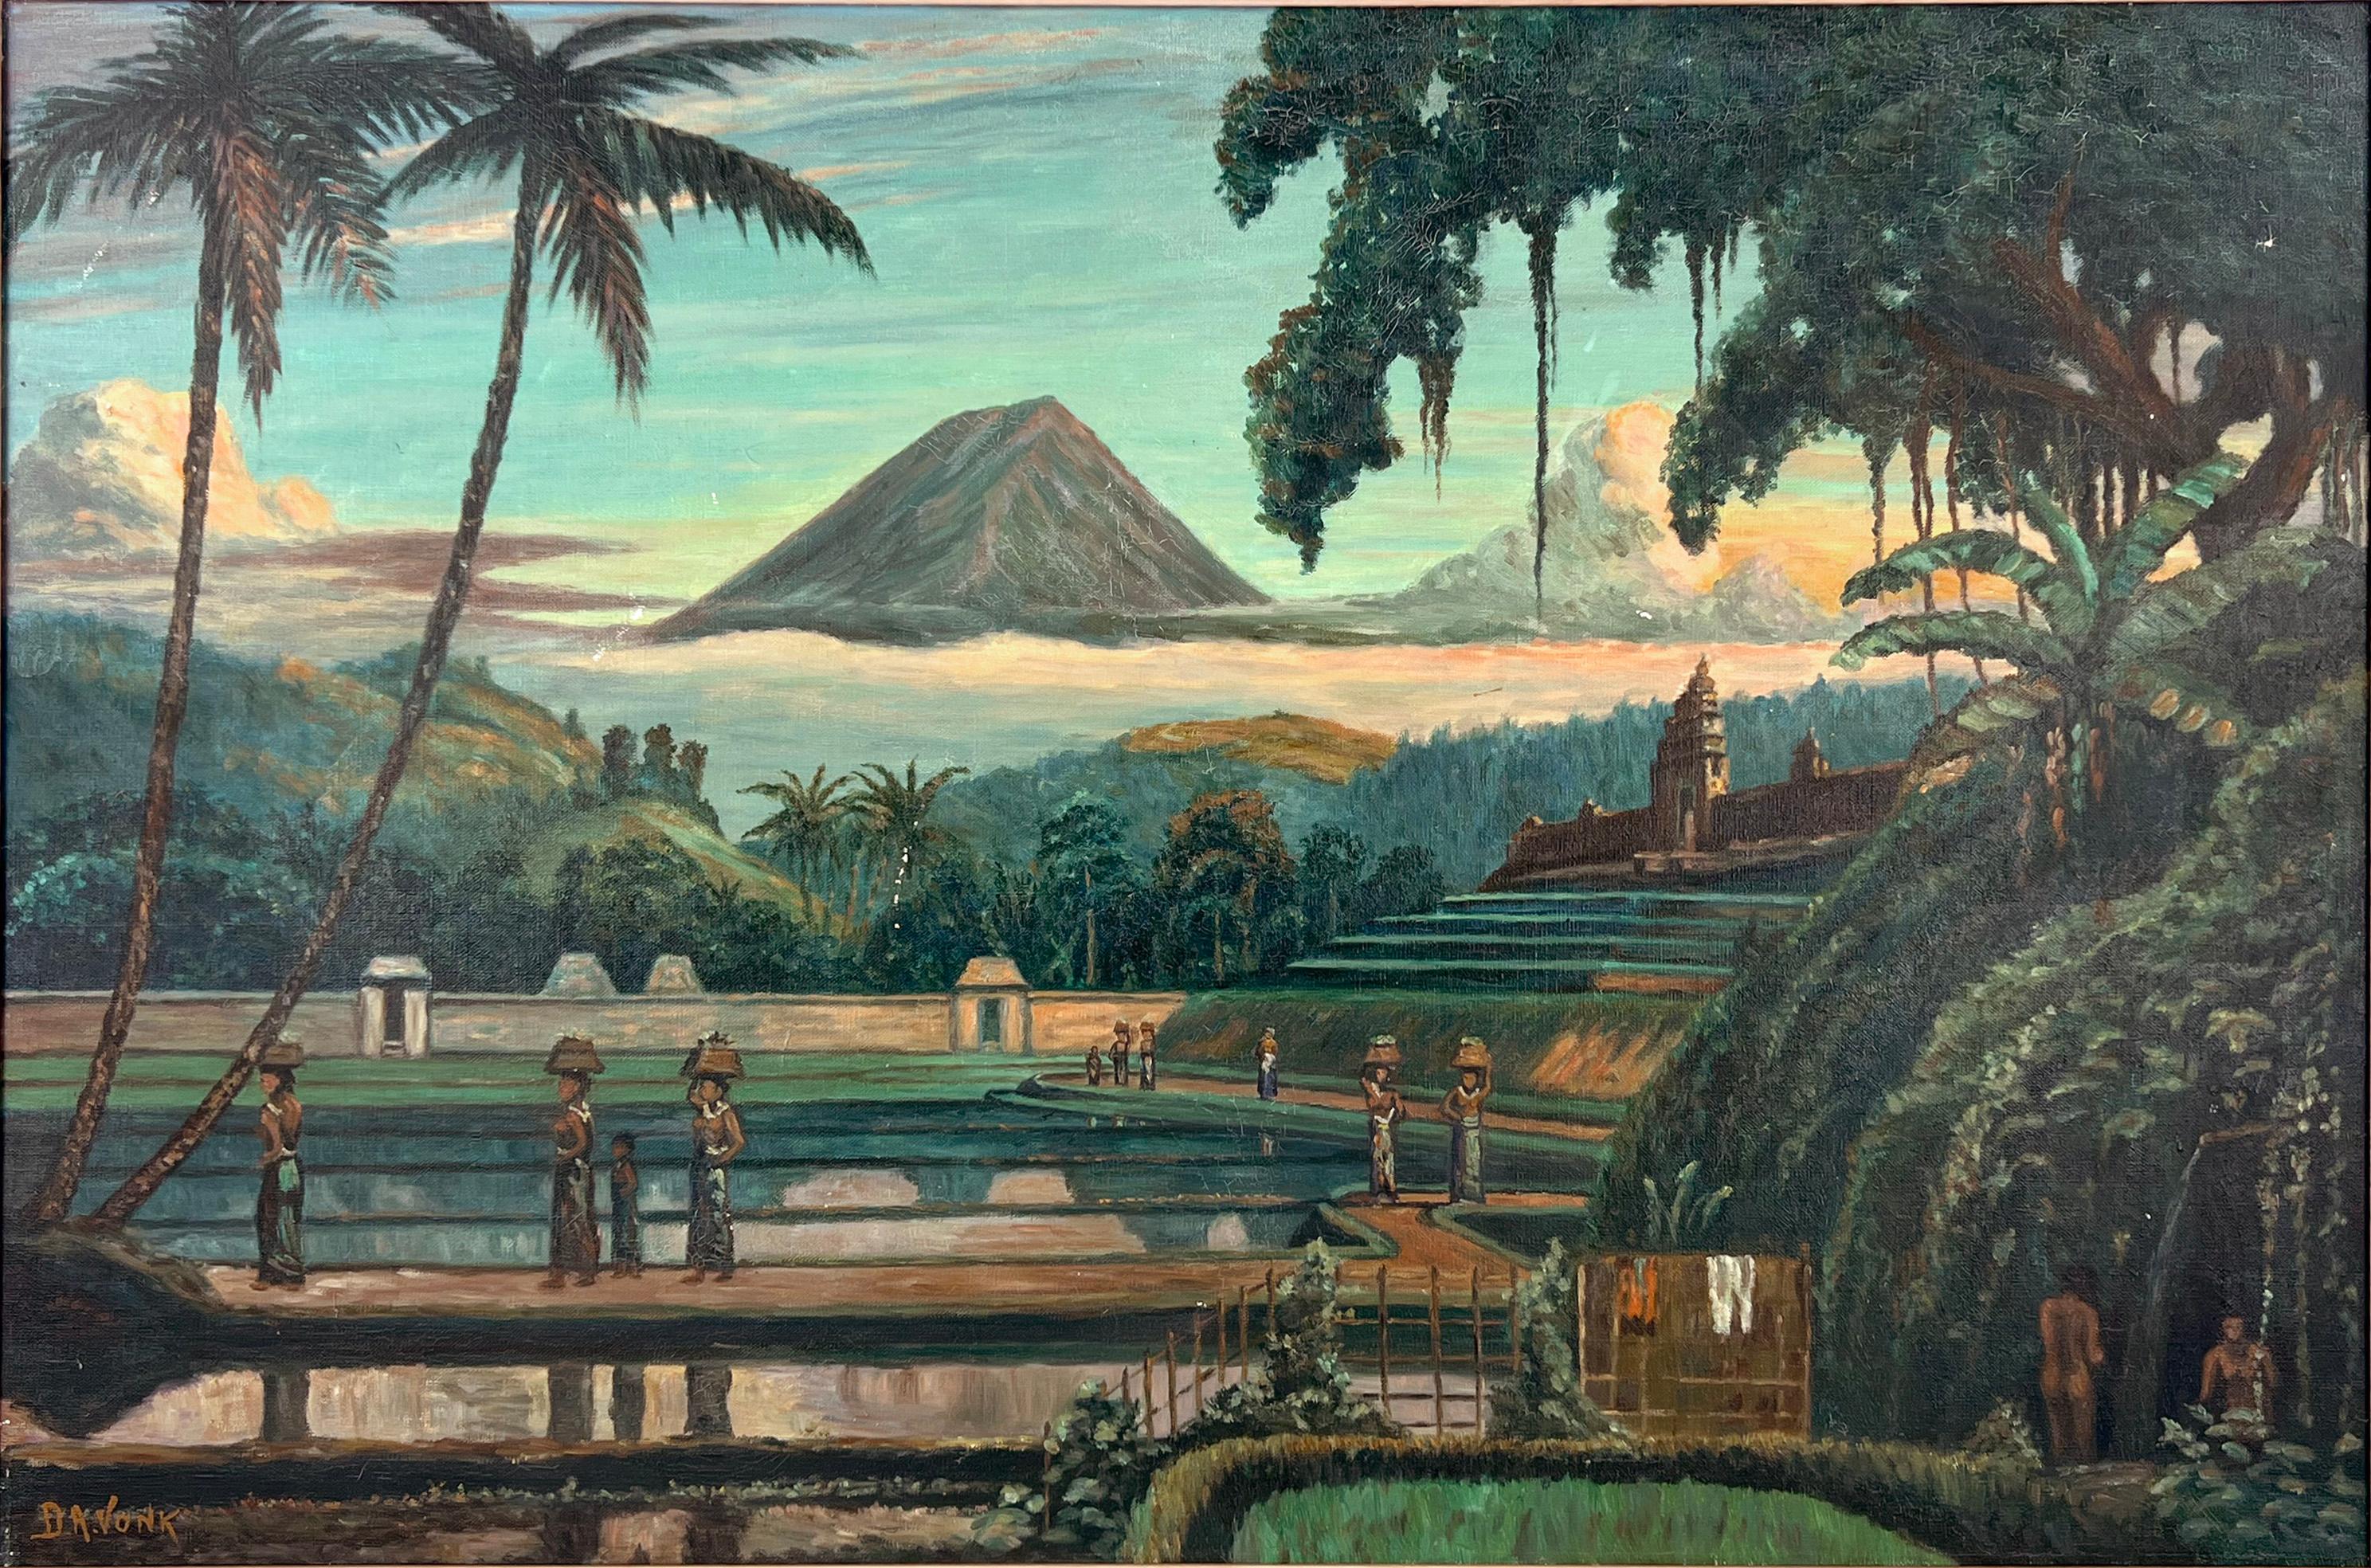 Mount Sumbing or Gunung Sumbing an Active volcano in Central Java, Indonesia - Painting by D. A. Vonk